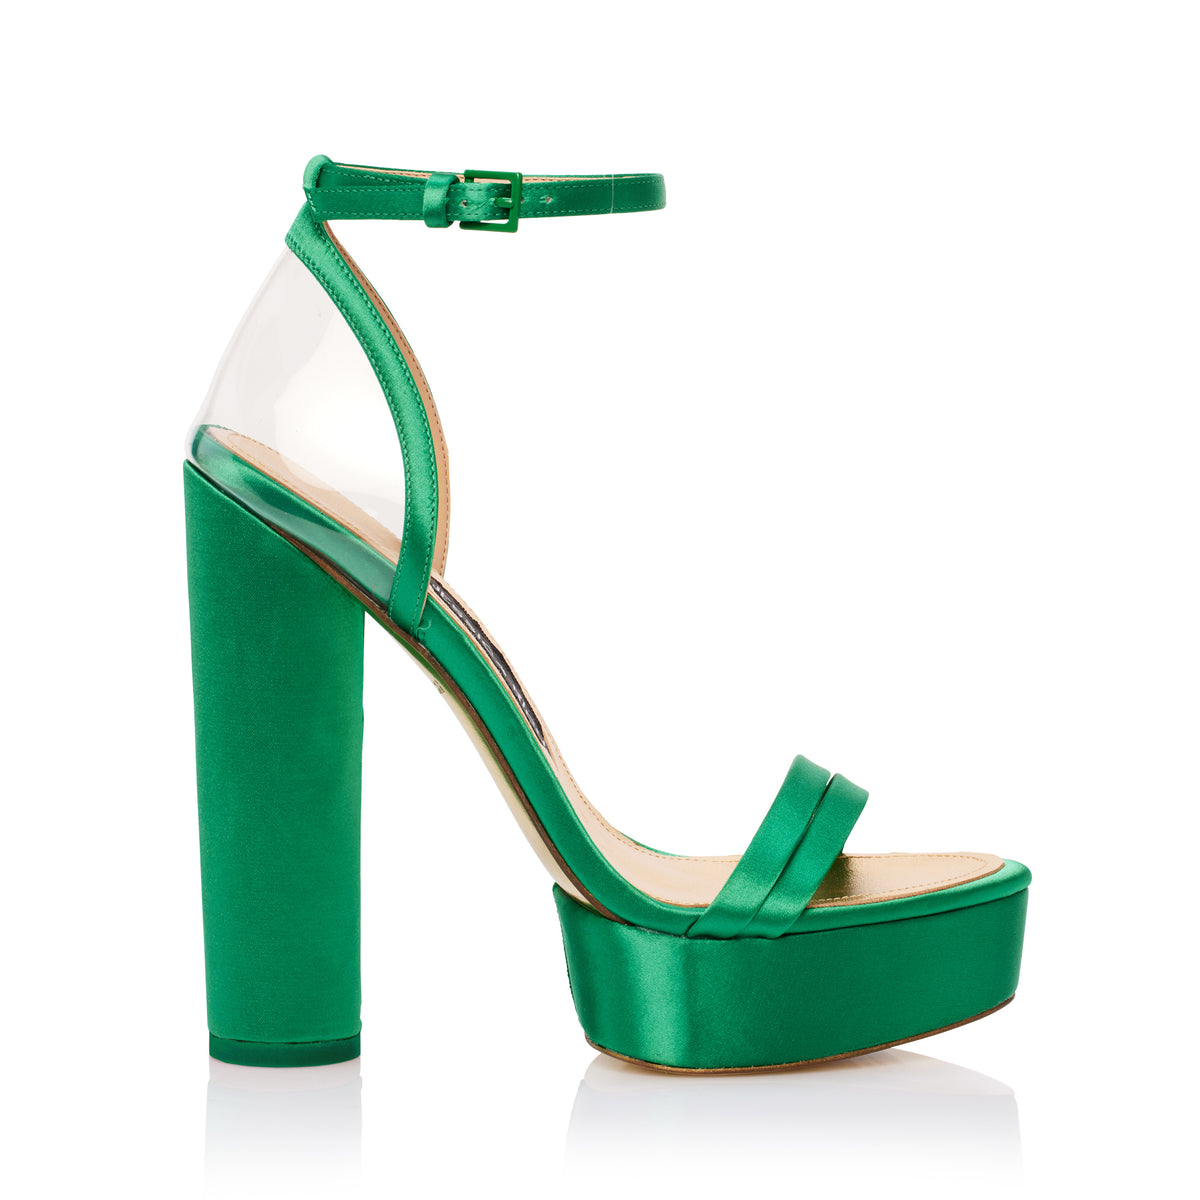 Profile of the Platform Sandal luxury high heels from Jessica Rich in green.